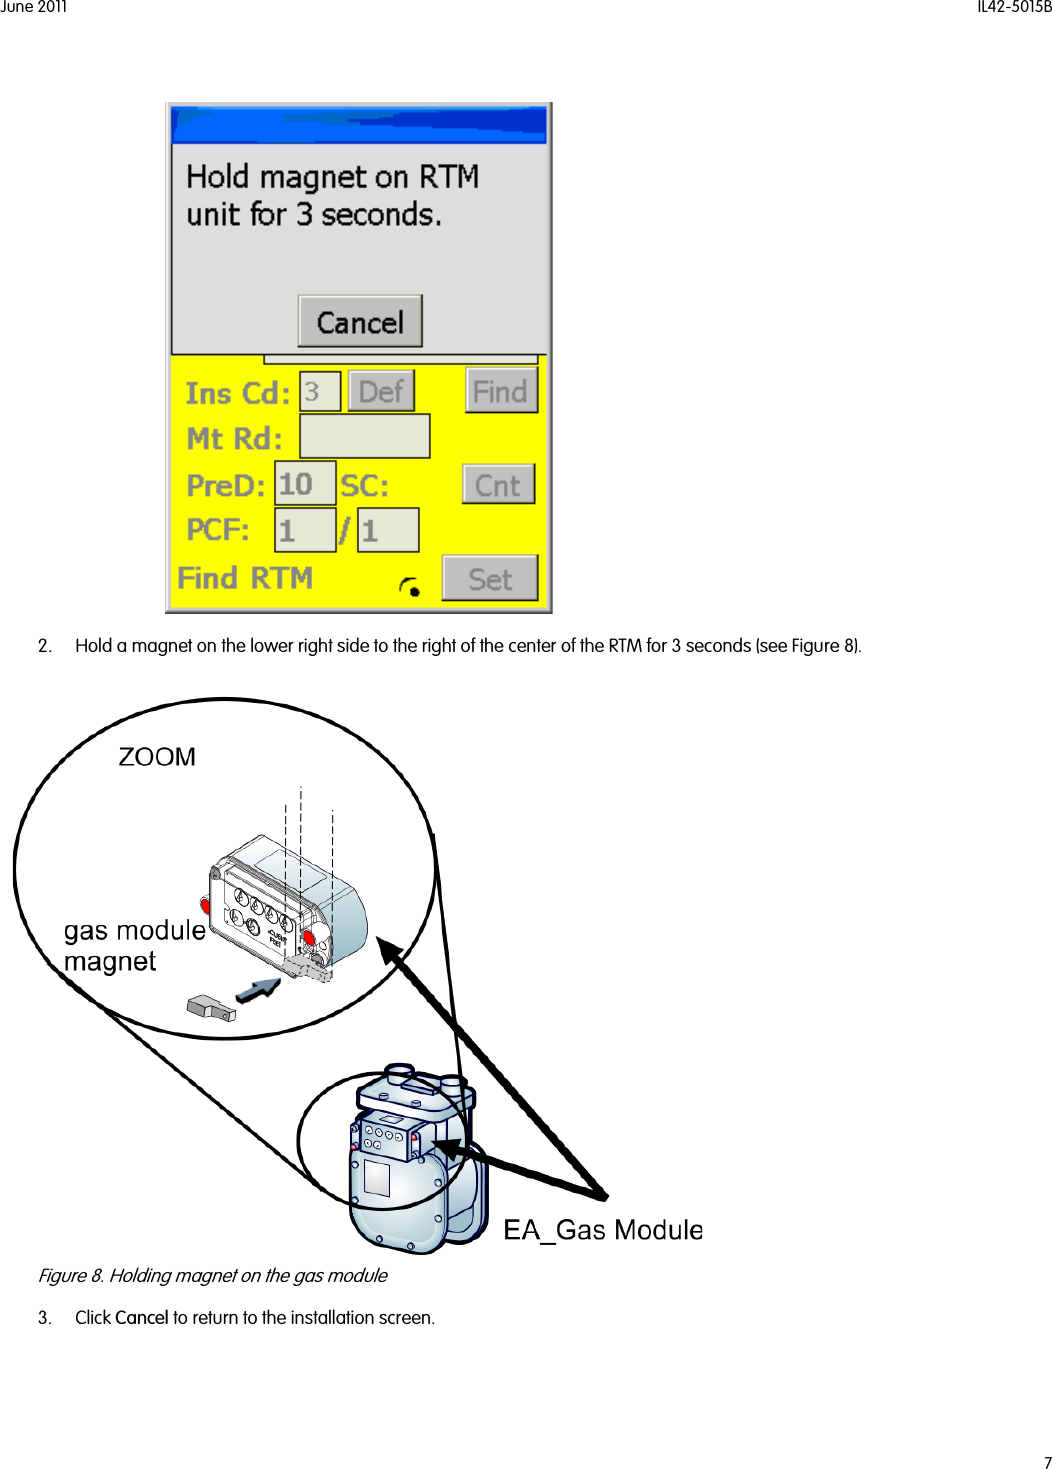 June 2011 IL42-5015B72. Hold a magnet on the lower right side to the right of the center of the RTM for 3 seconds (see Figure 8).Figure 8. Holding magnet on the gas module3. Click Cancel to return to the installation screen.